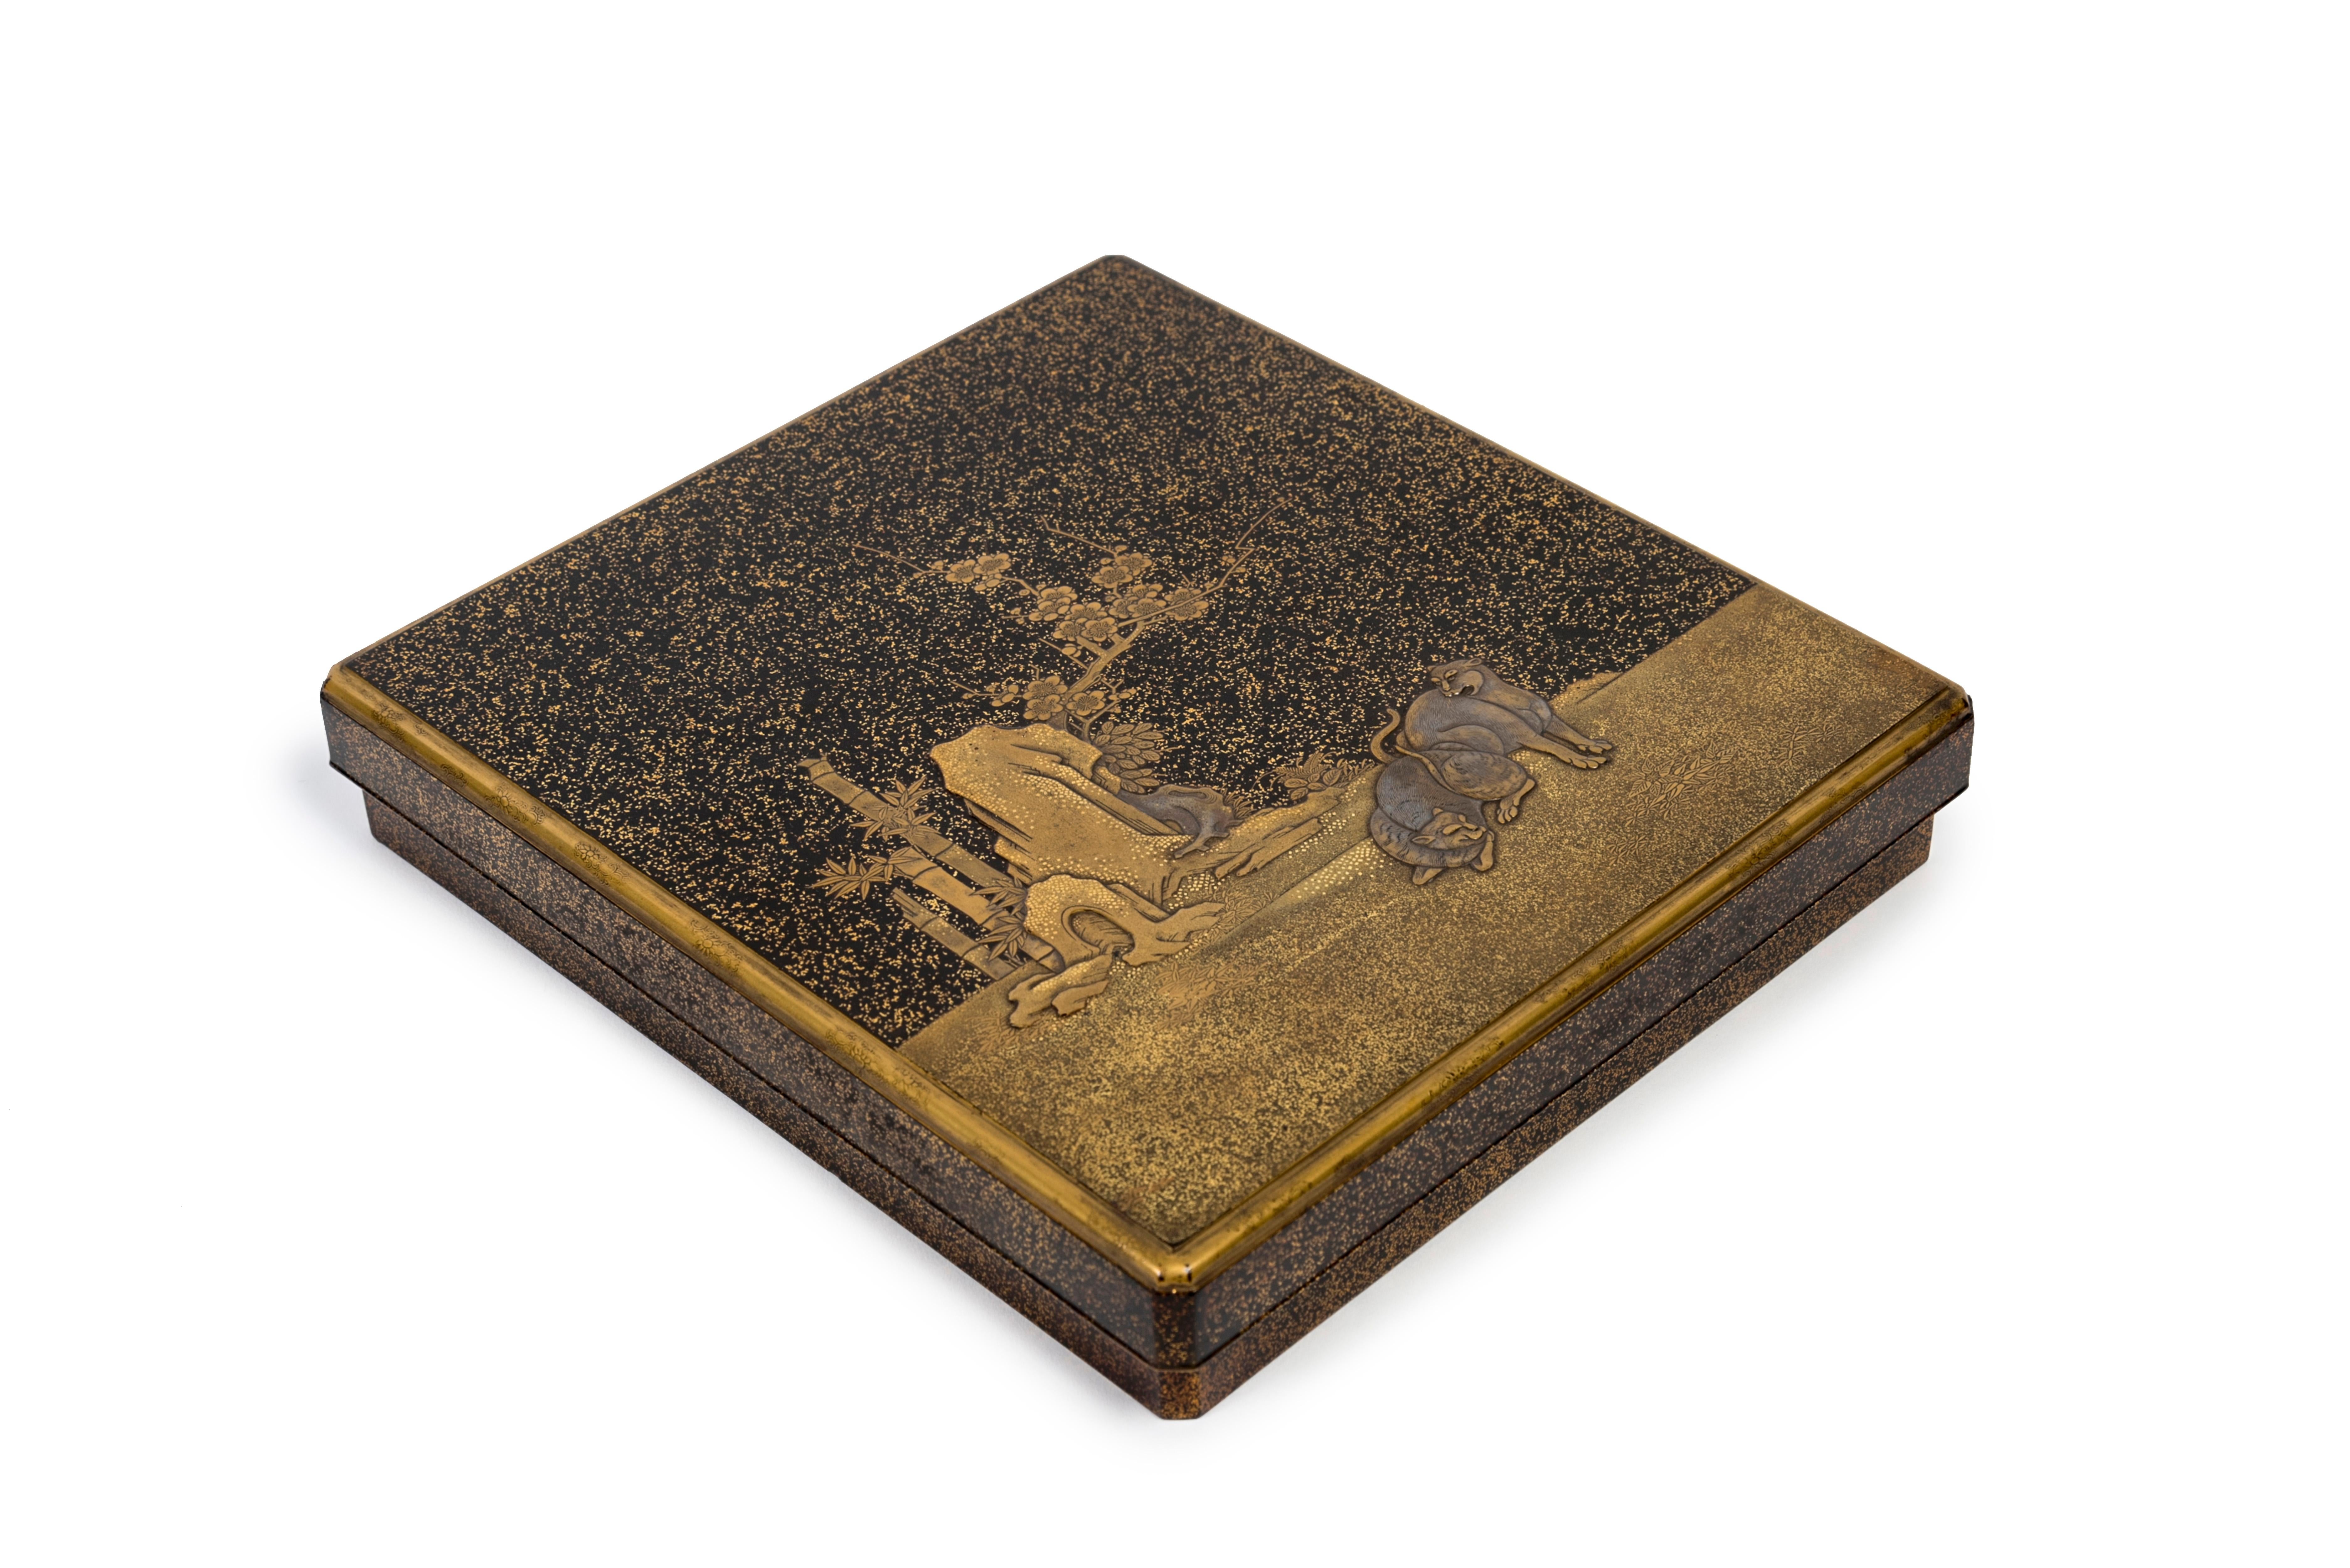 Black and gold lacquer suzuribako (writing set) in takamaki-e on a nashi-ji background representing two tigers near rocks, bamboos and plum blossoms in a night landscape. Inside of the lid with a lake landscape.
The interior of the suzuribako is